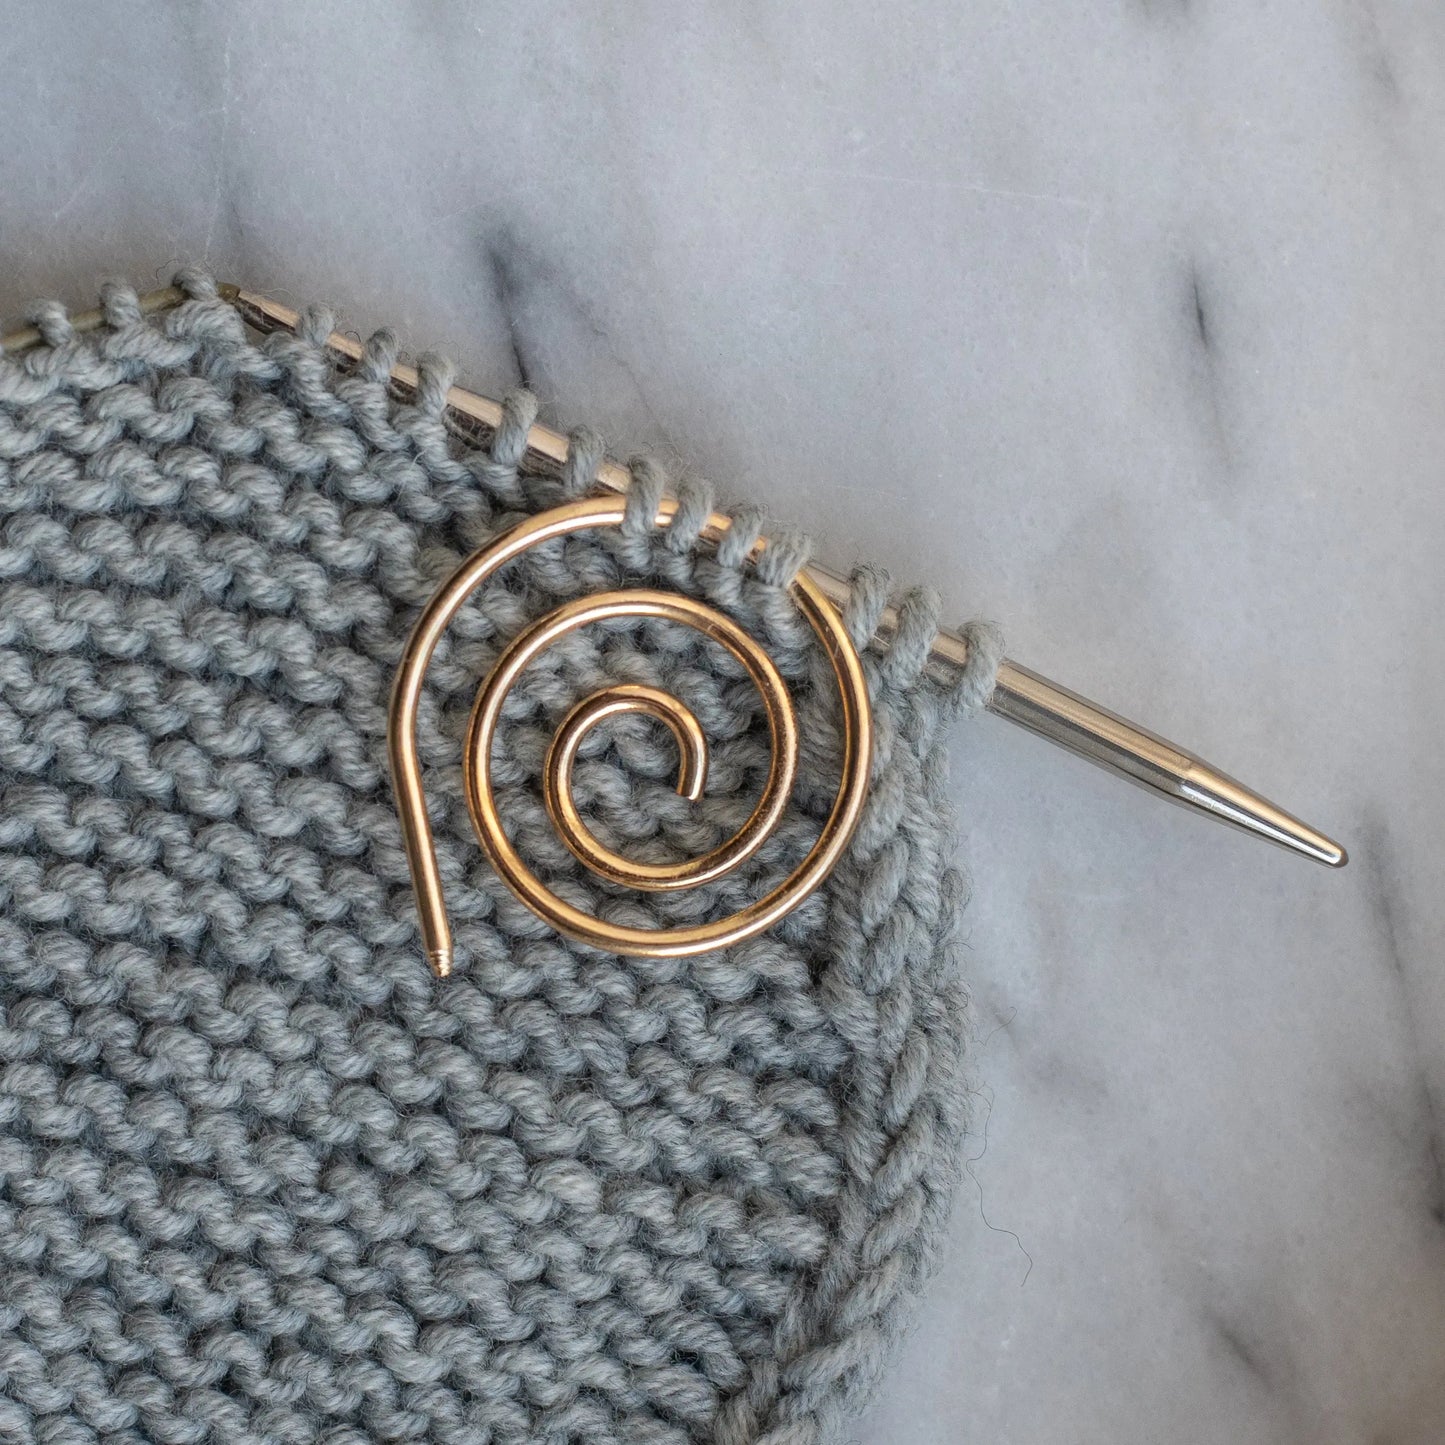 Spiral helping needle KNITS by cindy ekman